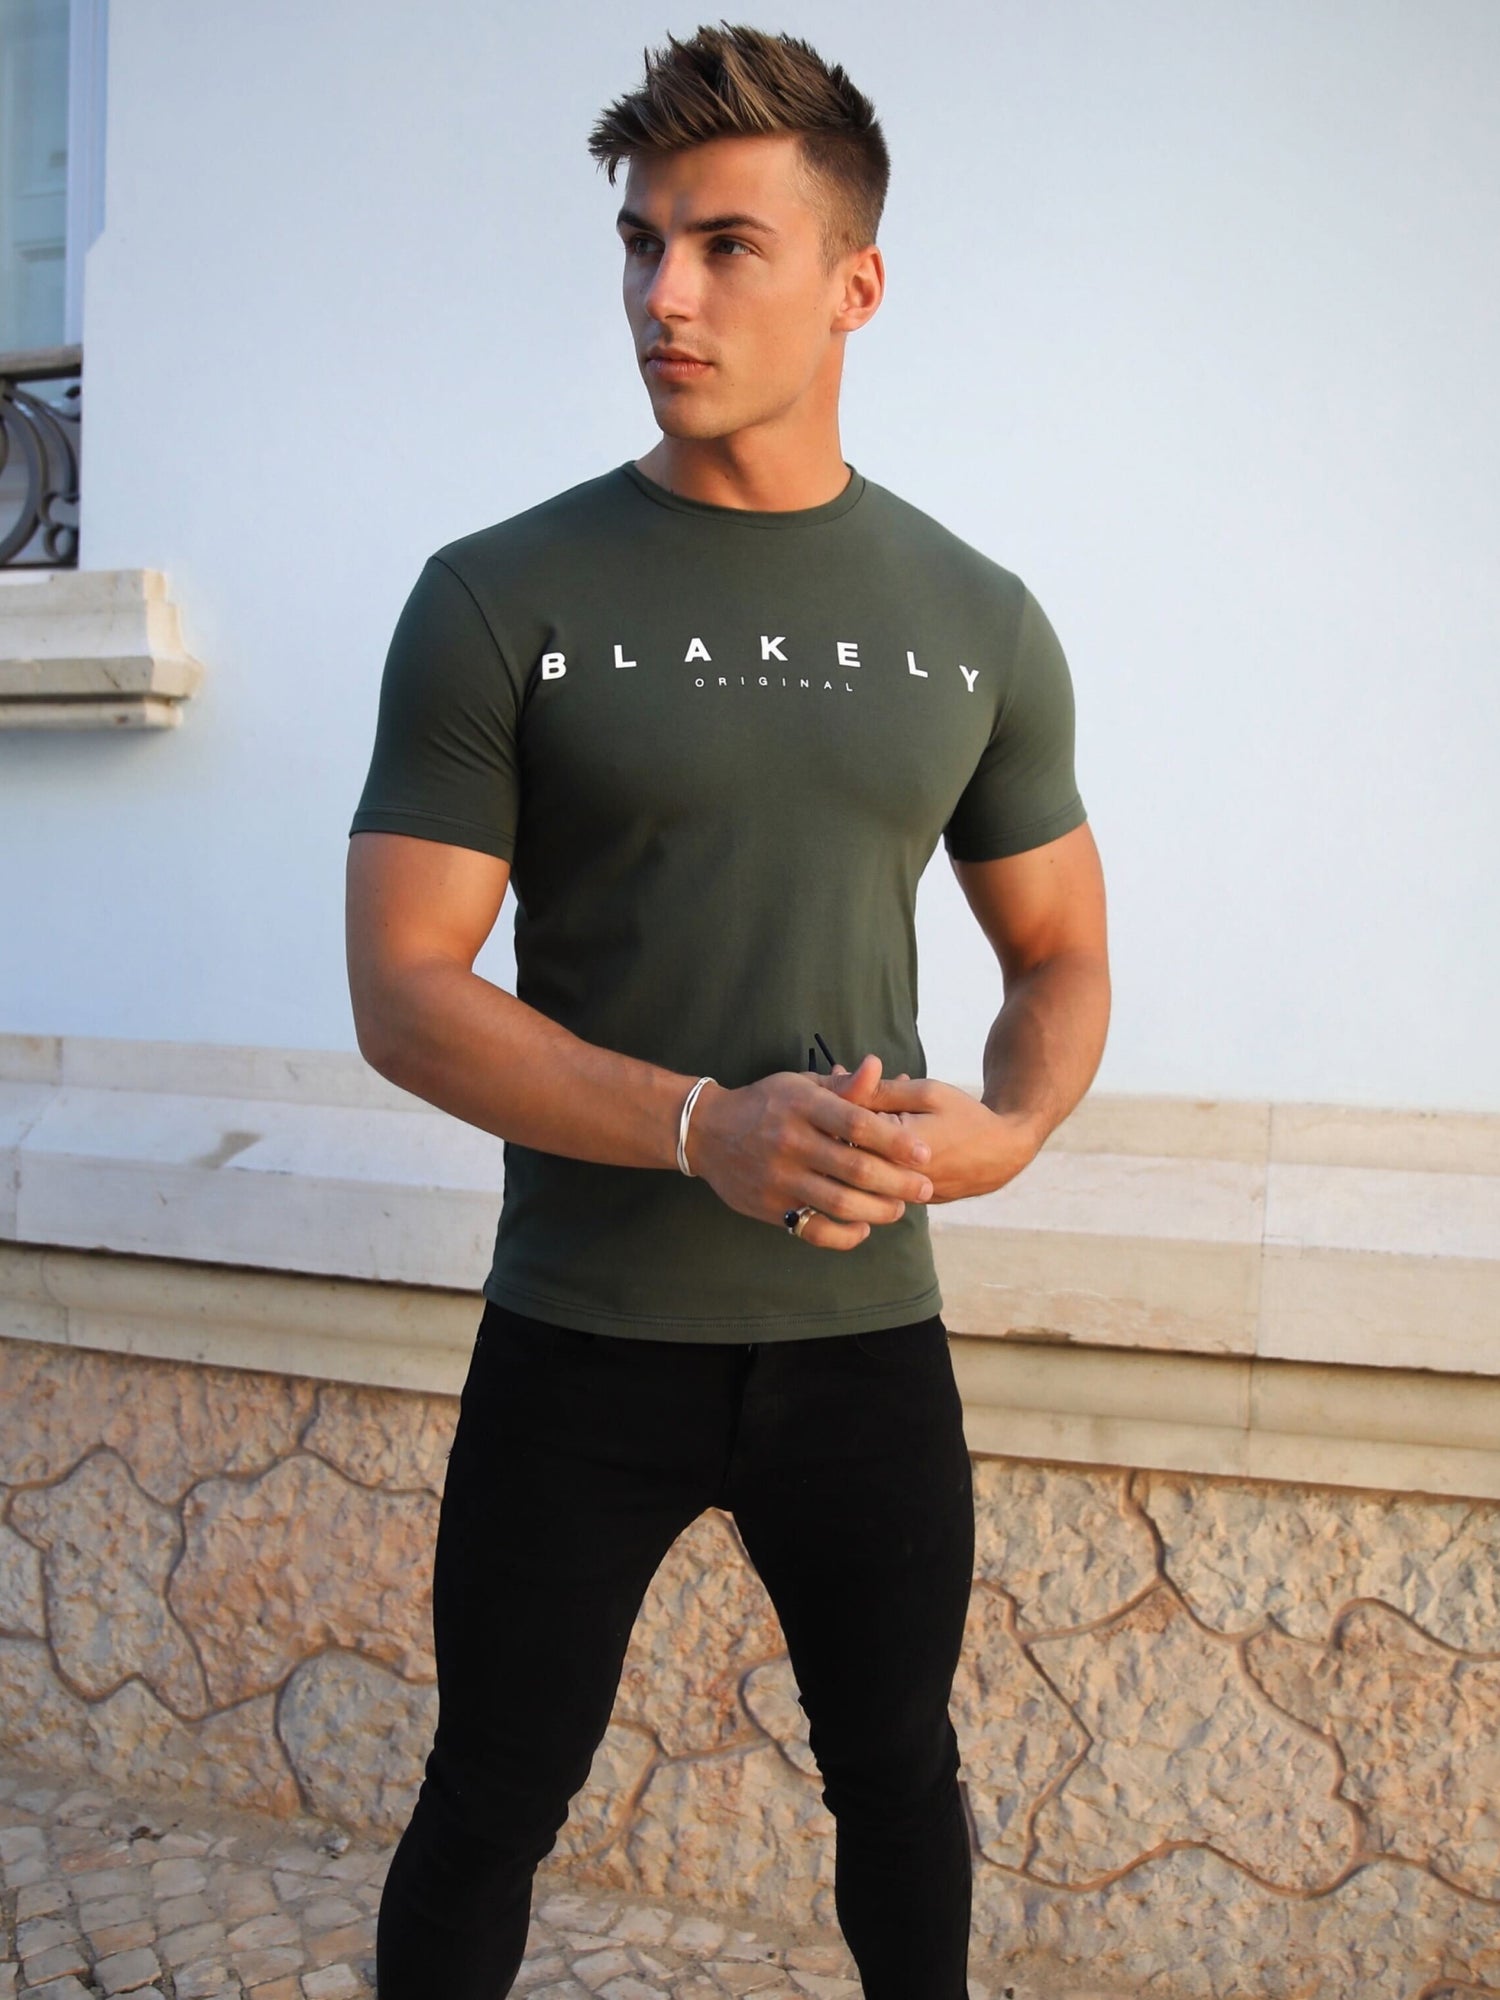 Blakely Clothing Tahiti Mens Green T-Shirt | Free delivery on orders ...